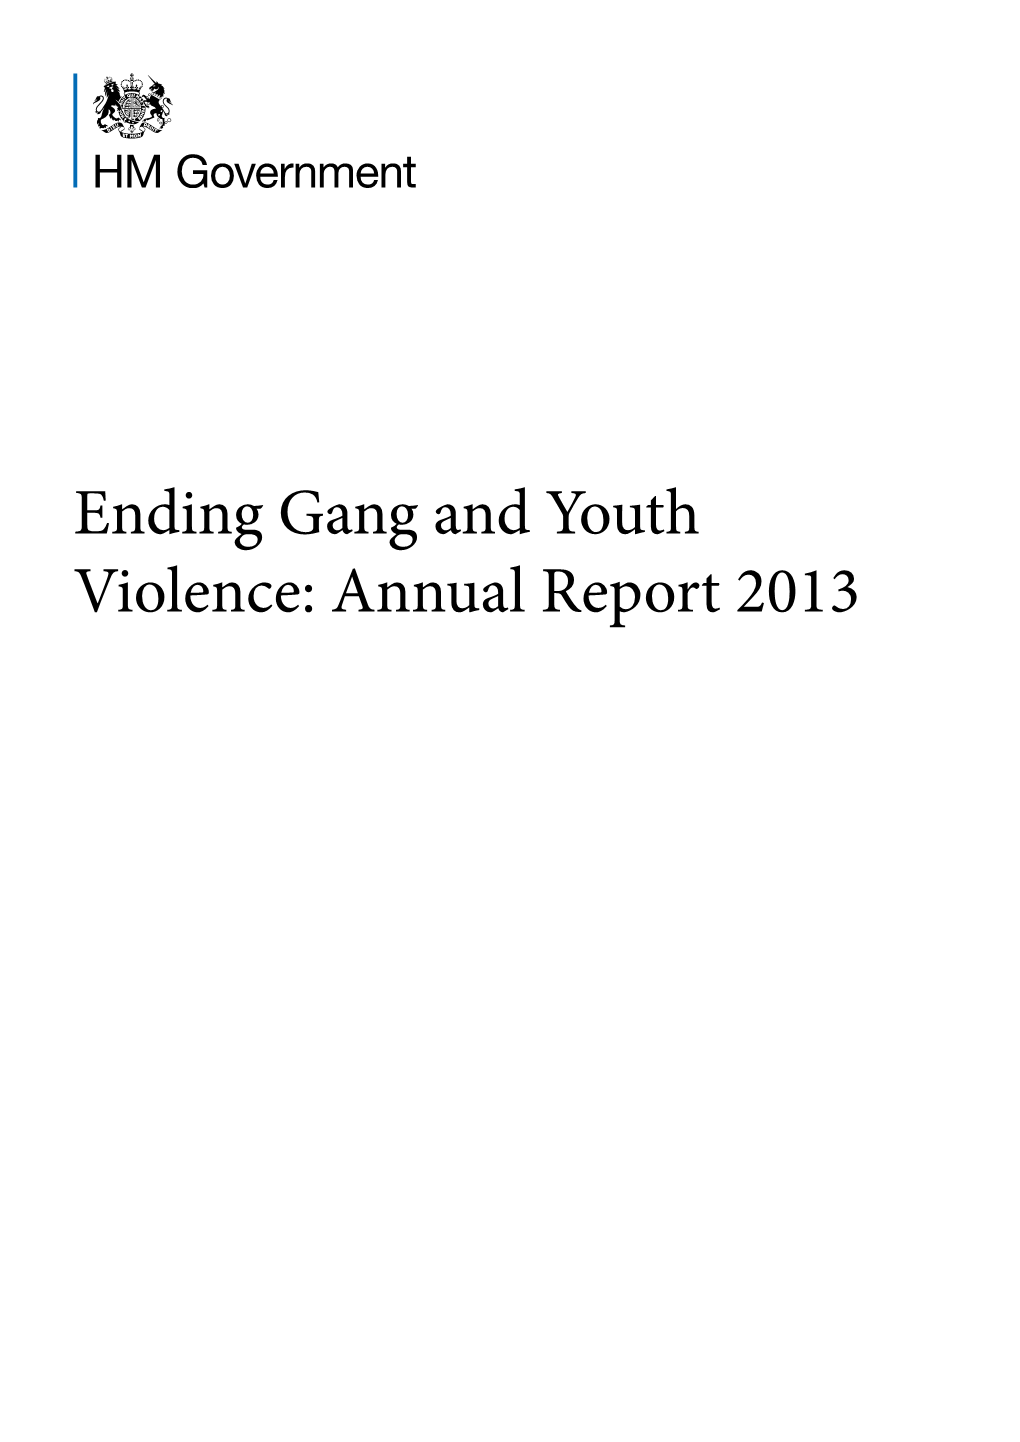 Ending Gang and Youth Violence: Annual Report 2013 Ending Gang and Youth Violence: Annual Report 2013